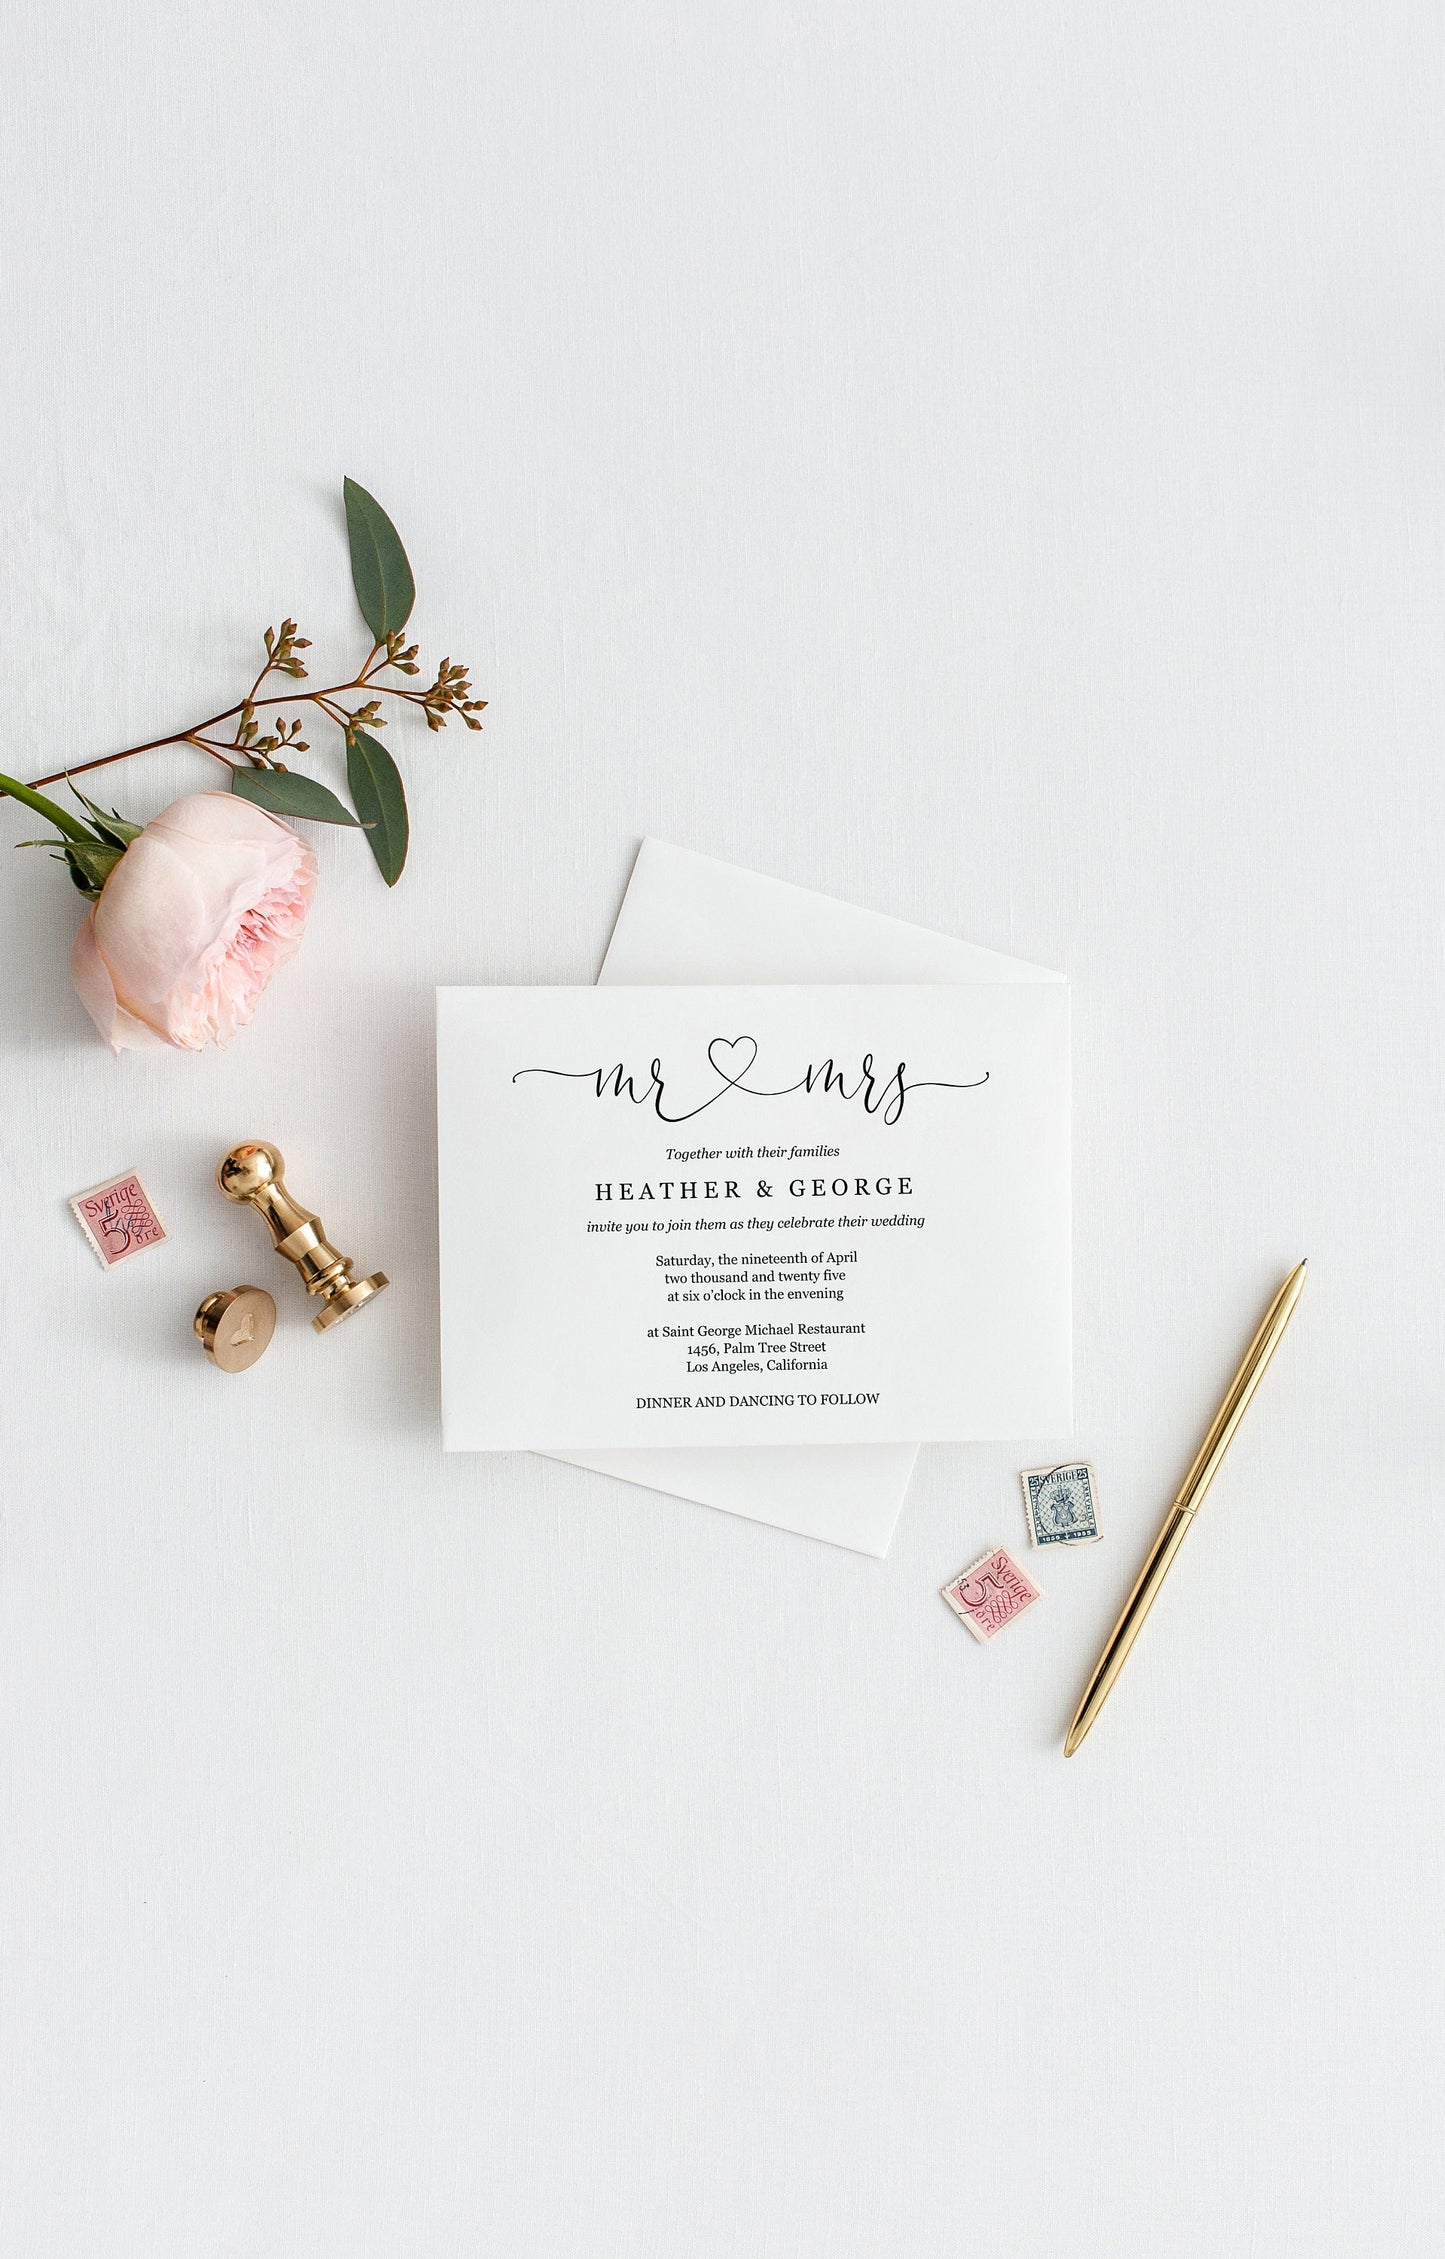 Mr and Mrs Wedding Invitation Template Editable Wedding Invitation Template Printable Calligraphy Instant Download Heart - Heather WEDDING INVITATIONS SAVVY PAPER CO